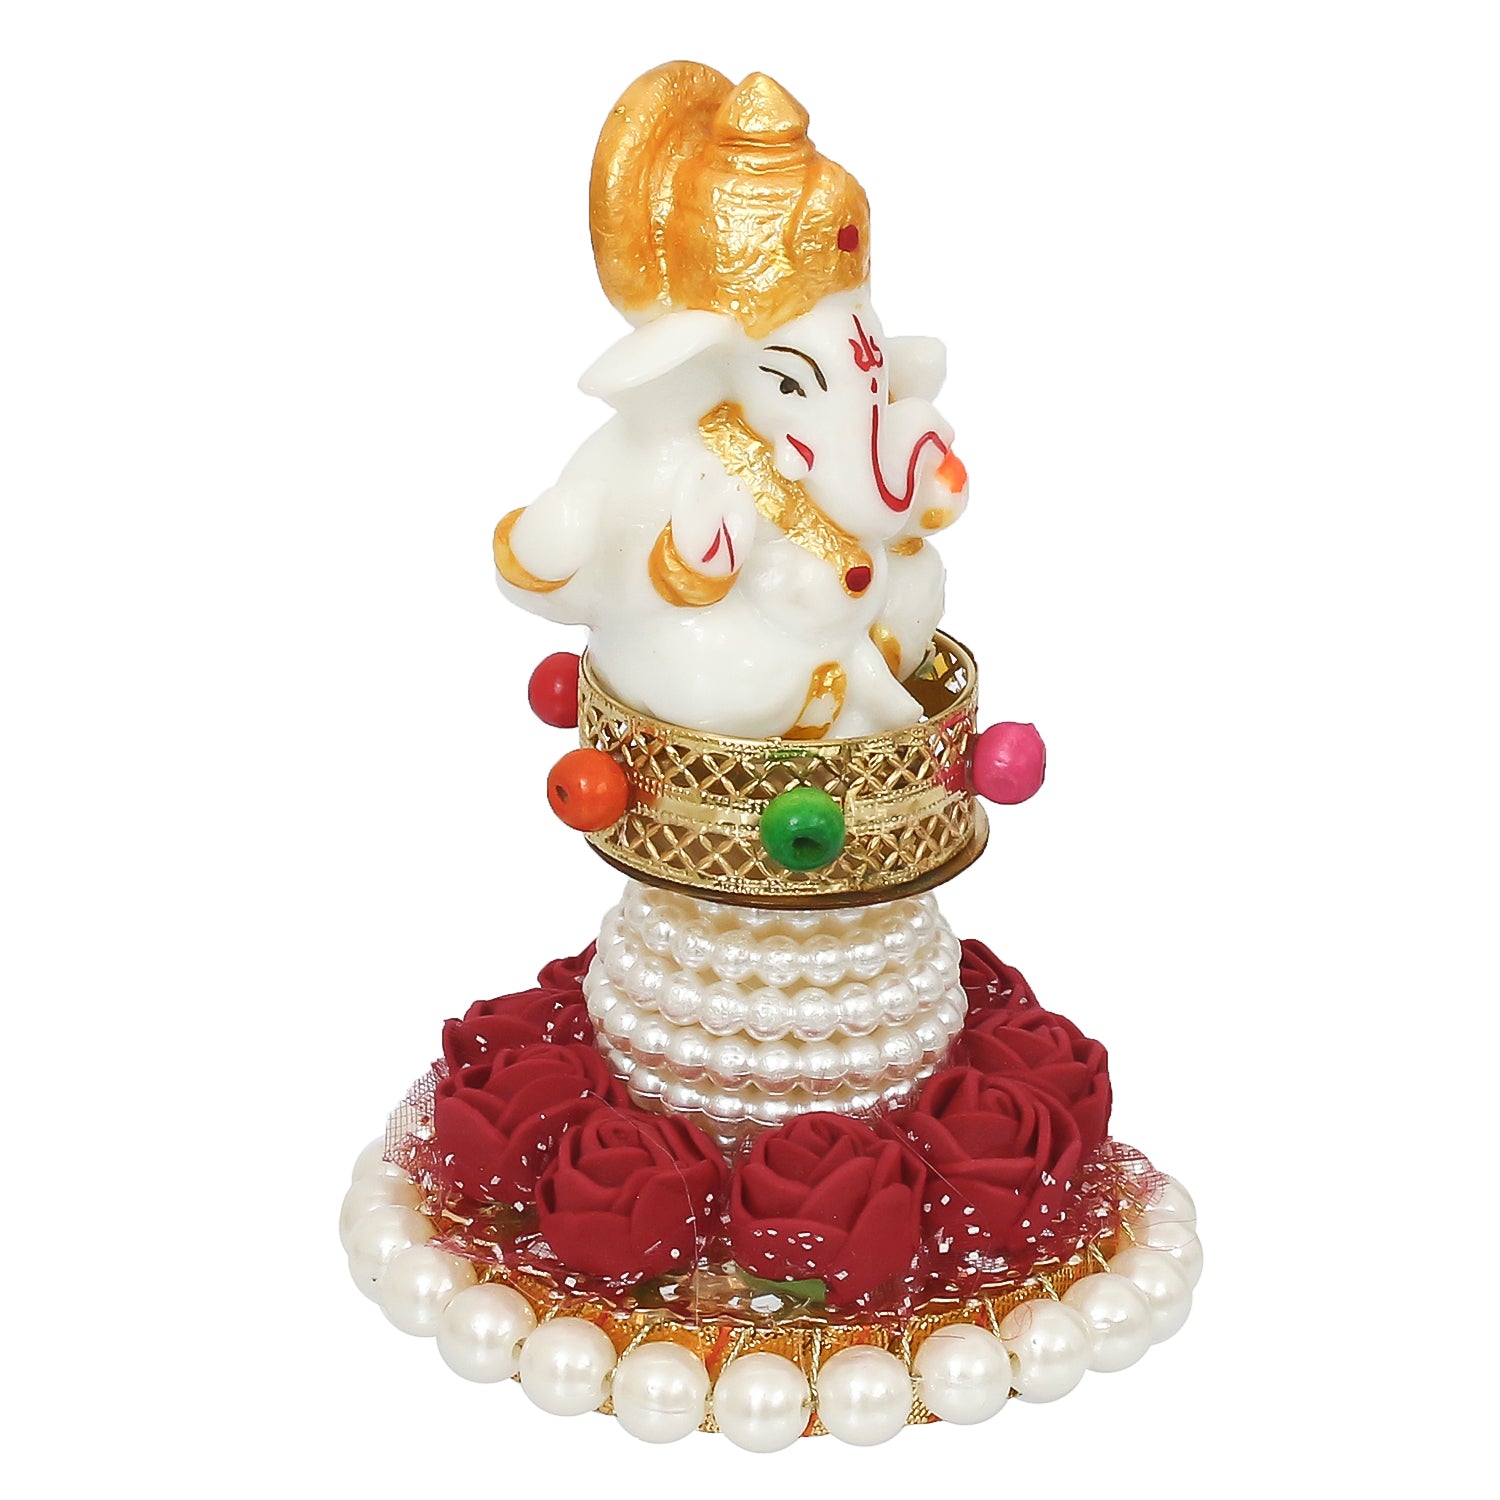 Polyresin Lord Ganesha Idol on Decorative Handcrafted Plate for Home, Office and Car Dashboard 3